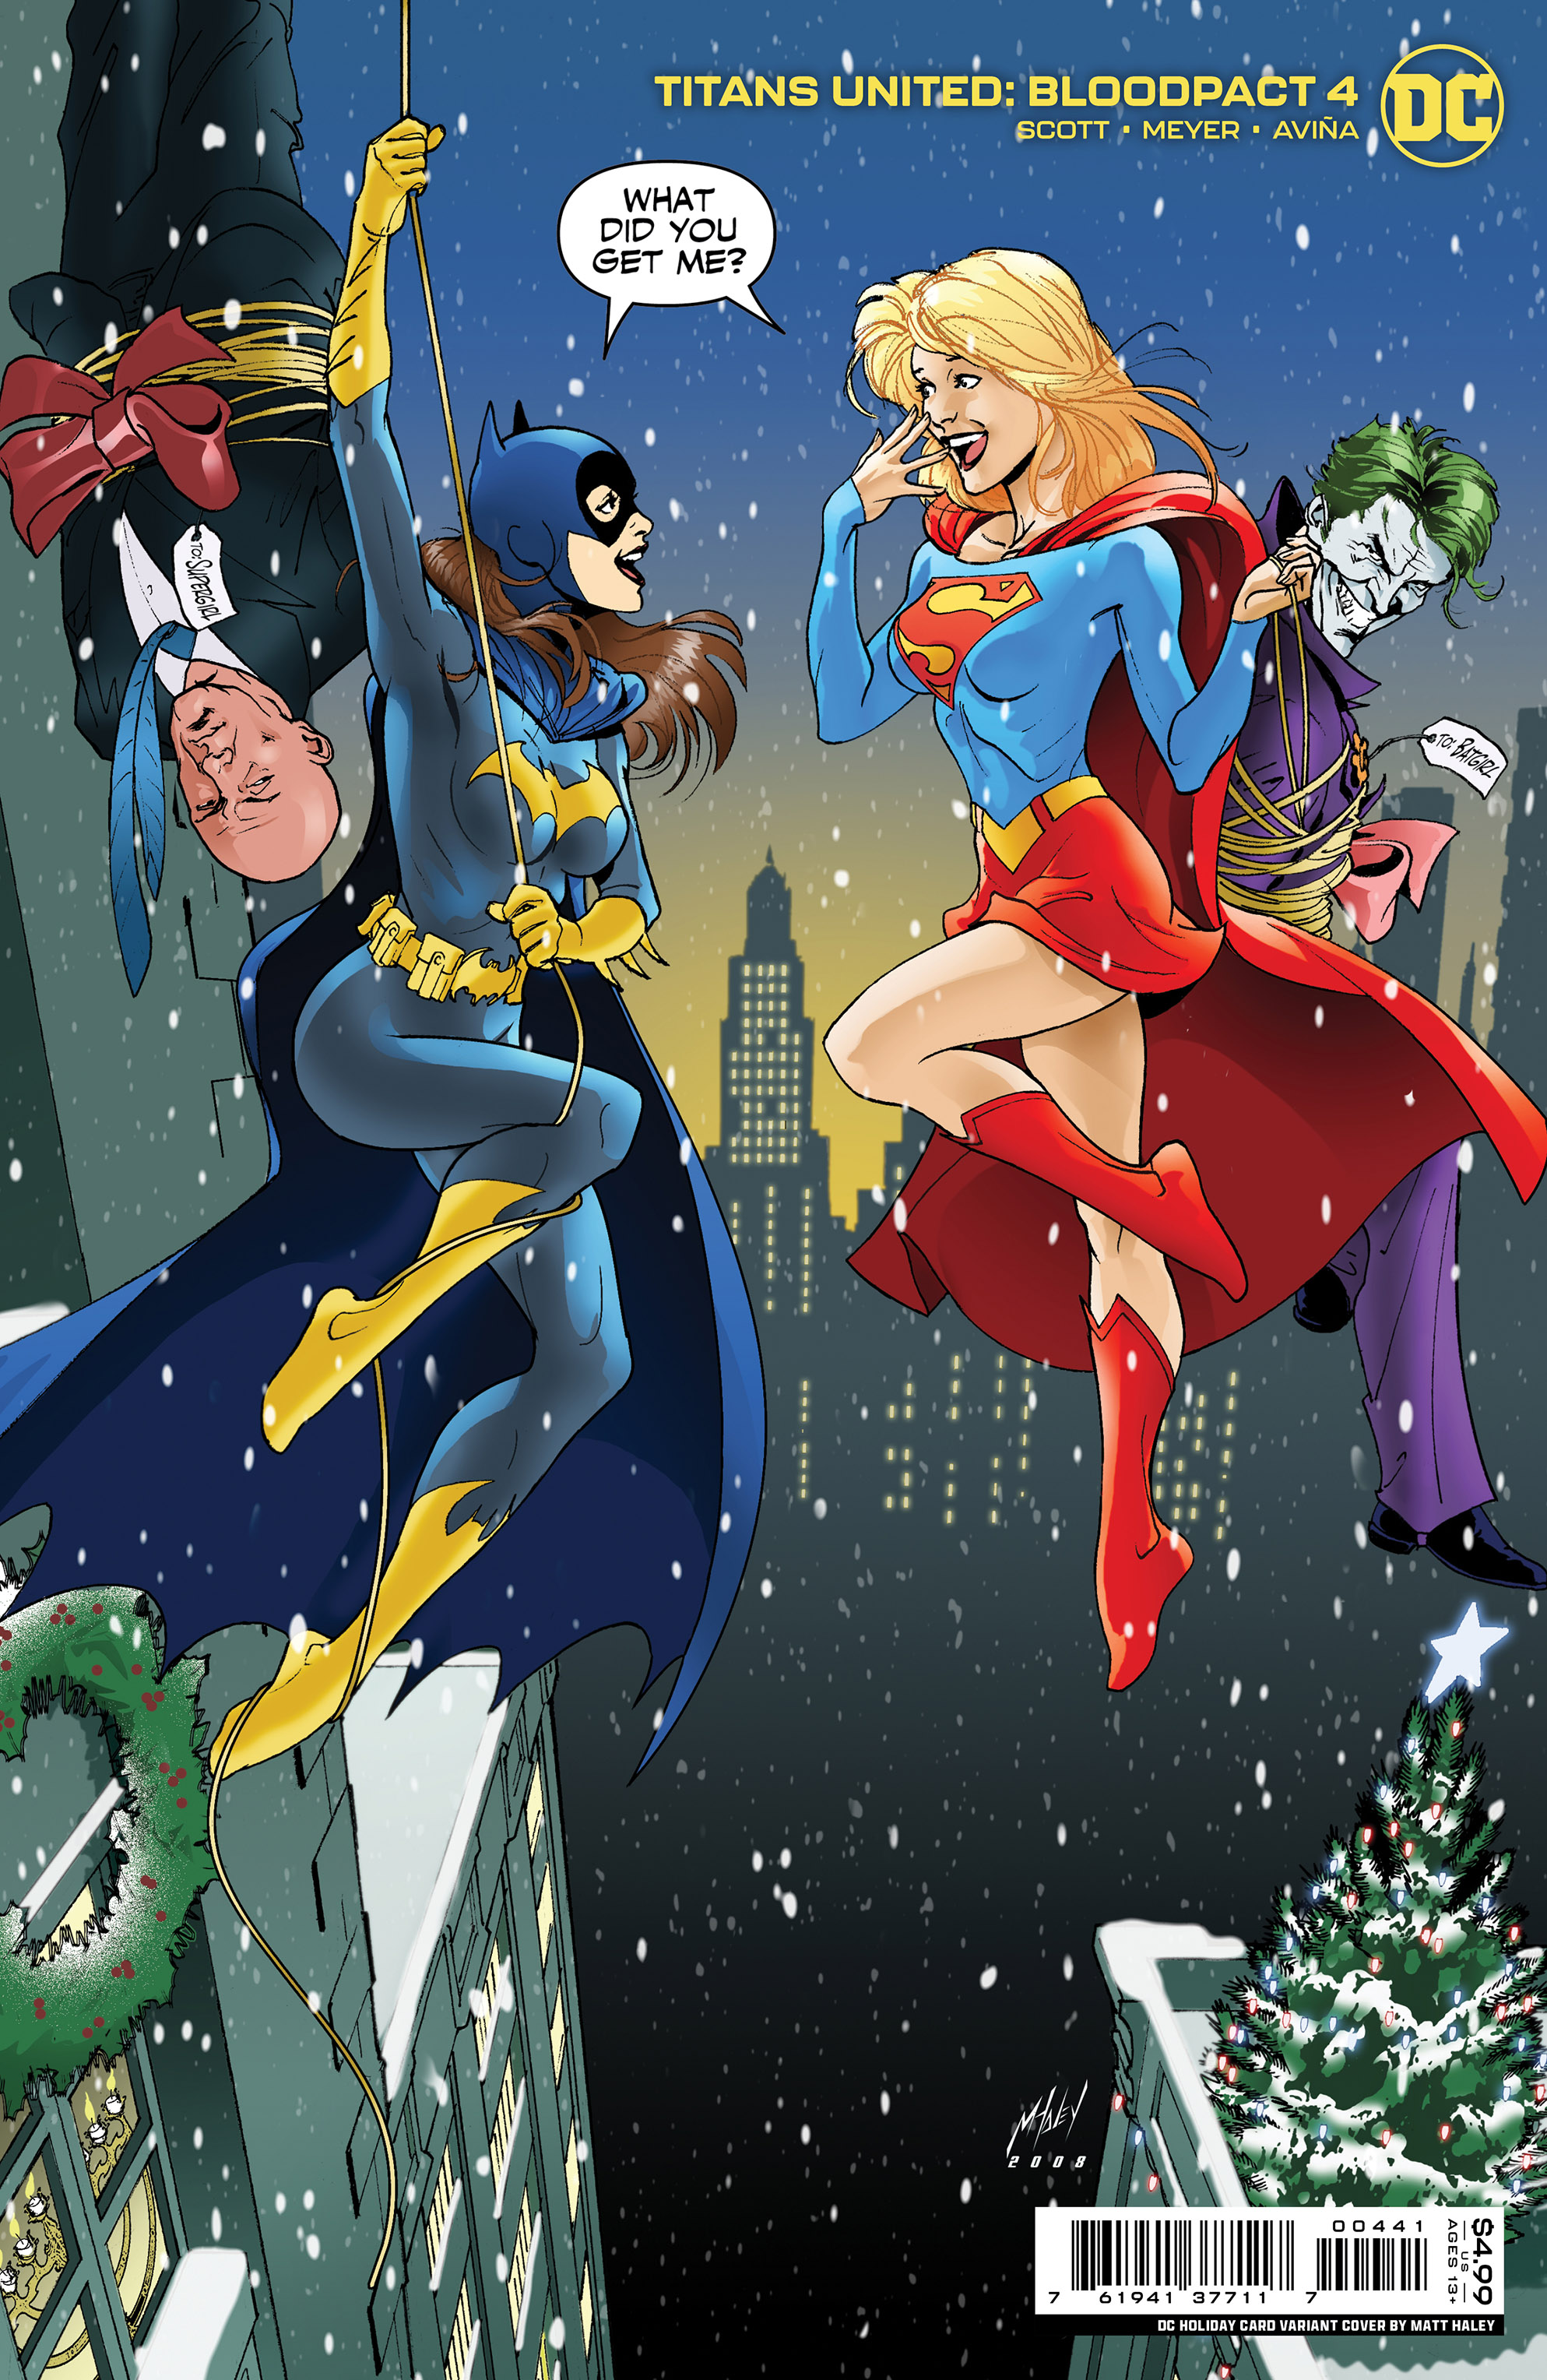 Titans United Bloodpact #4 Cover C Matt Haley DC Holiday Card Card Stock Variant (Of 6)